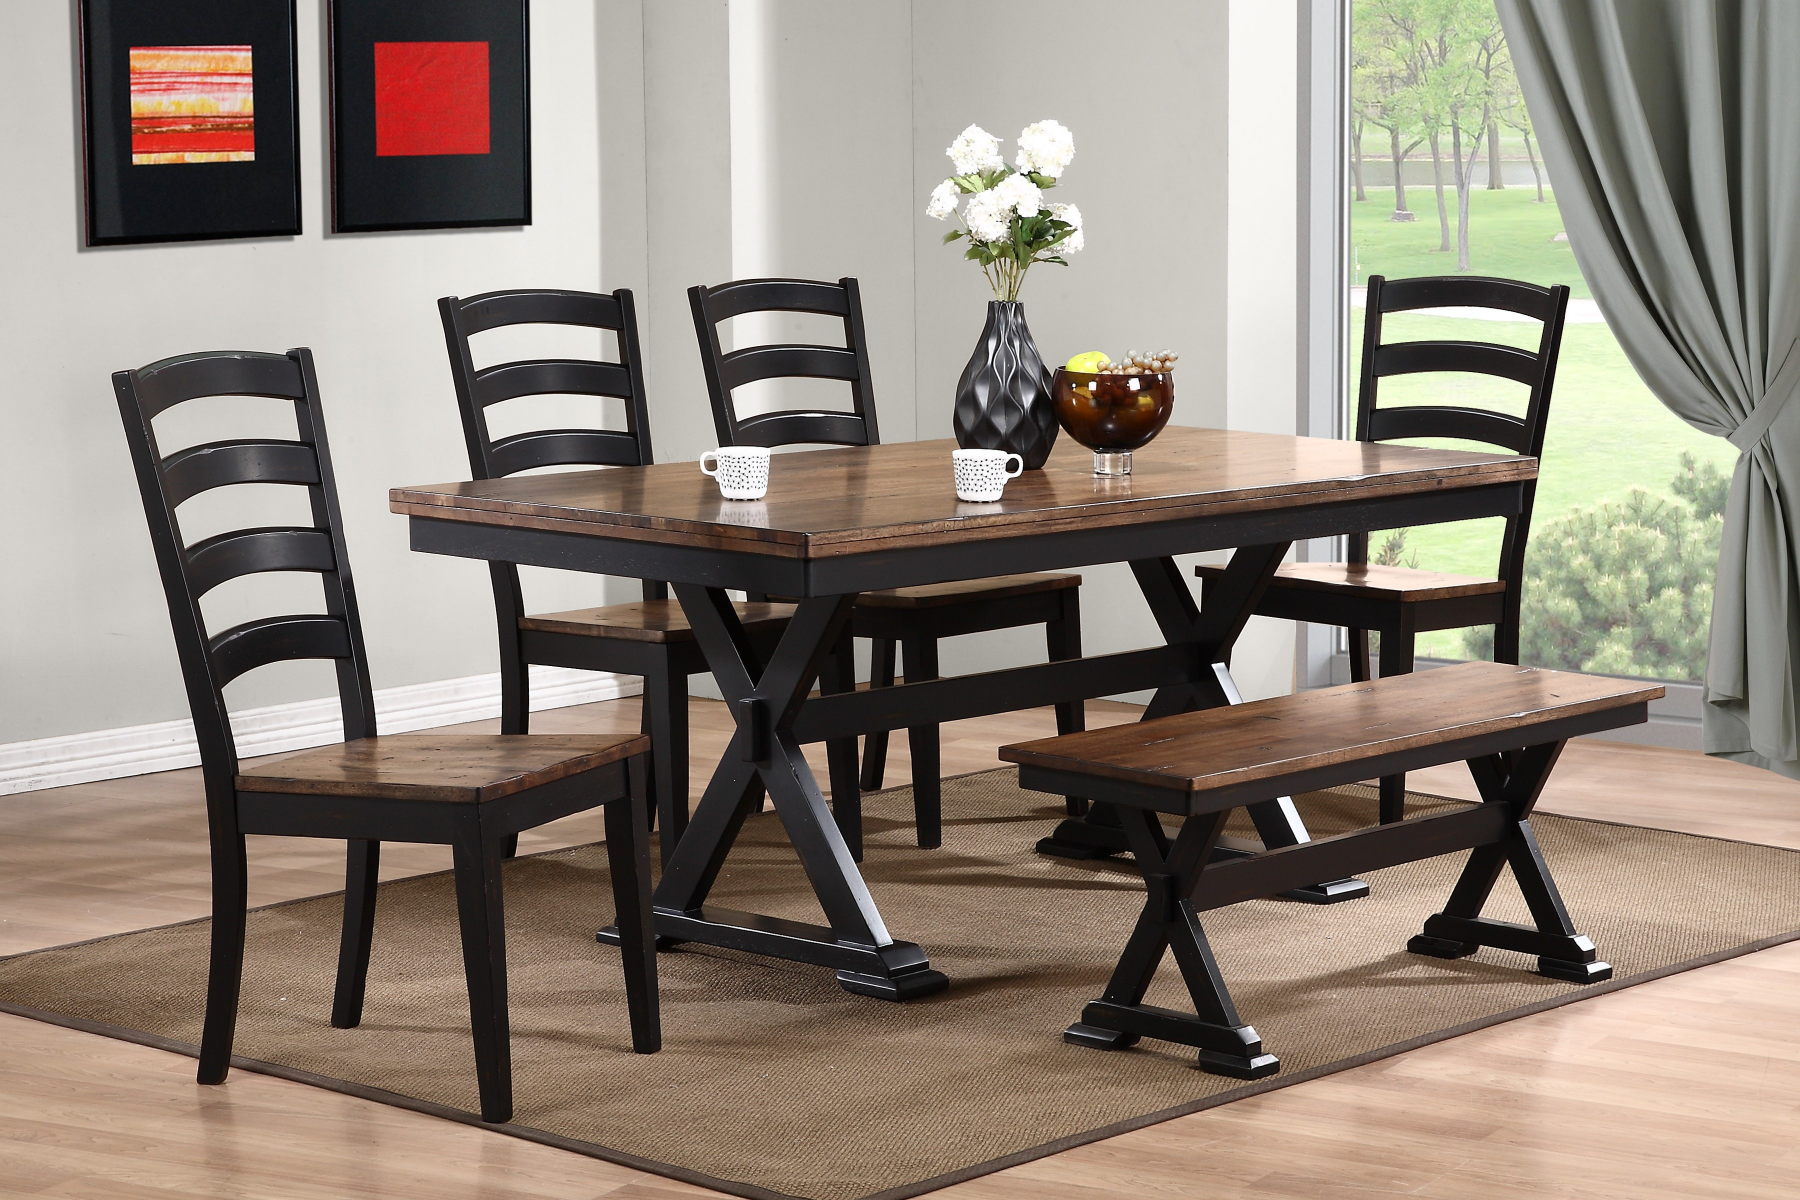 Transform Your Dining Room chairs and table set